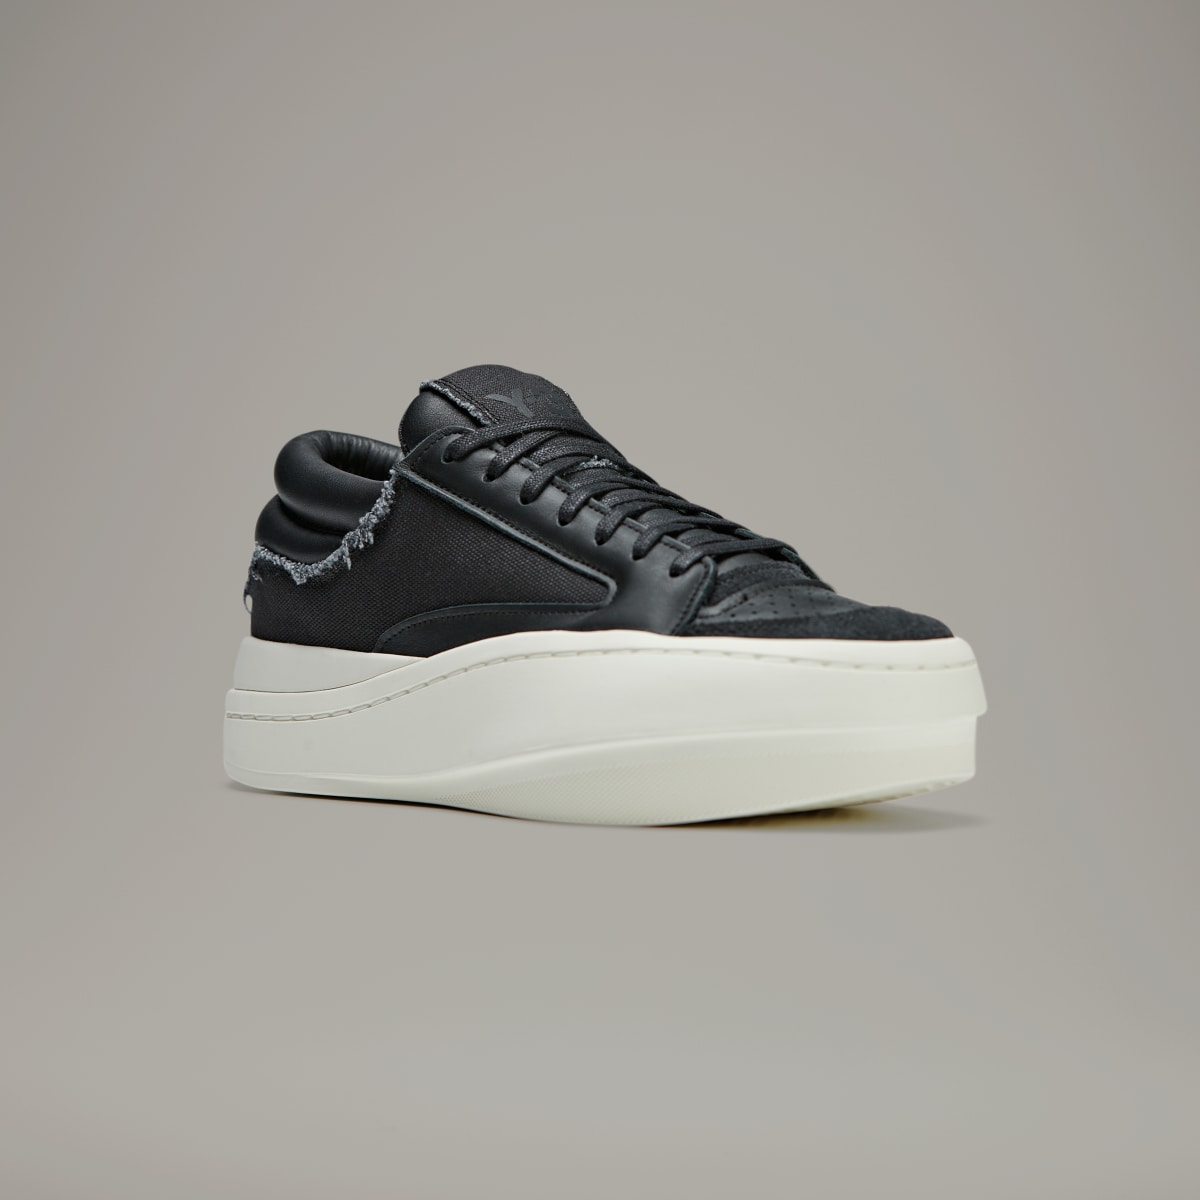 Adidas Y-3 Centennial Low Shoes. 6